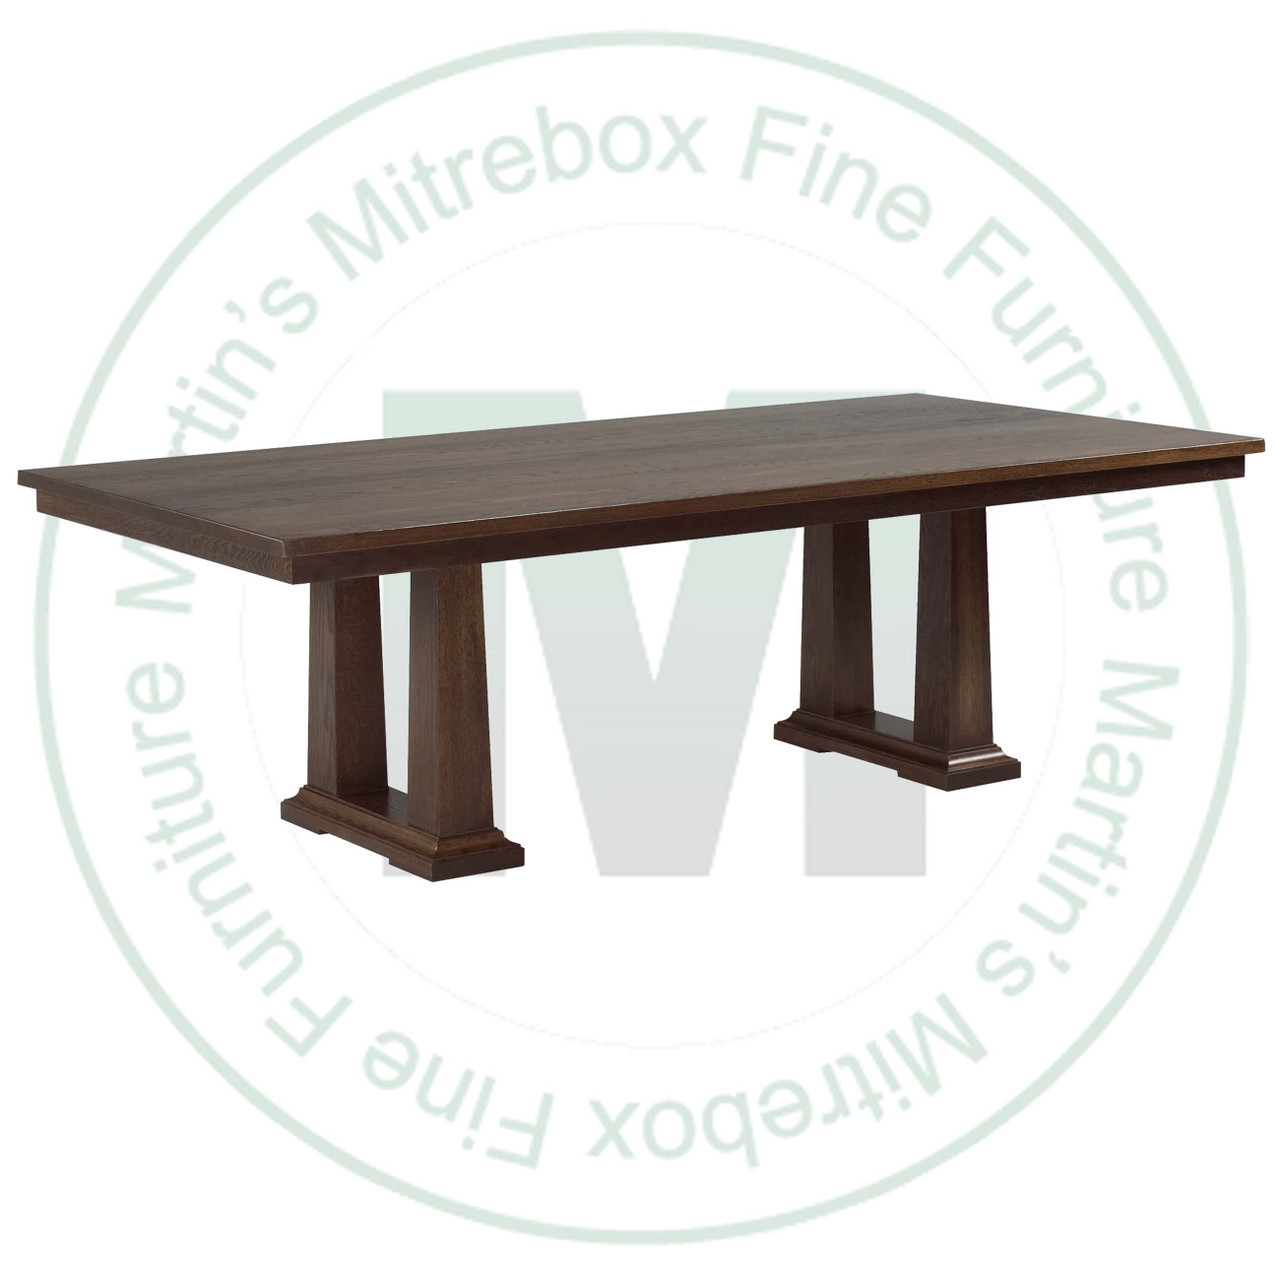 Oak Acropolis Extension Double Pedestal Table 54''D x 84''W x 30''H With 3 - 12'' Leaves Table Has 1.75'' Thick Top